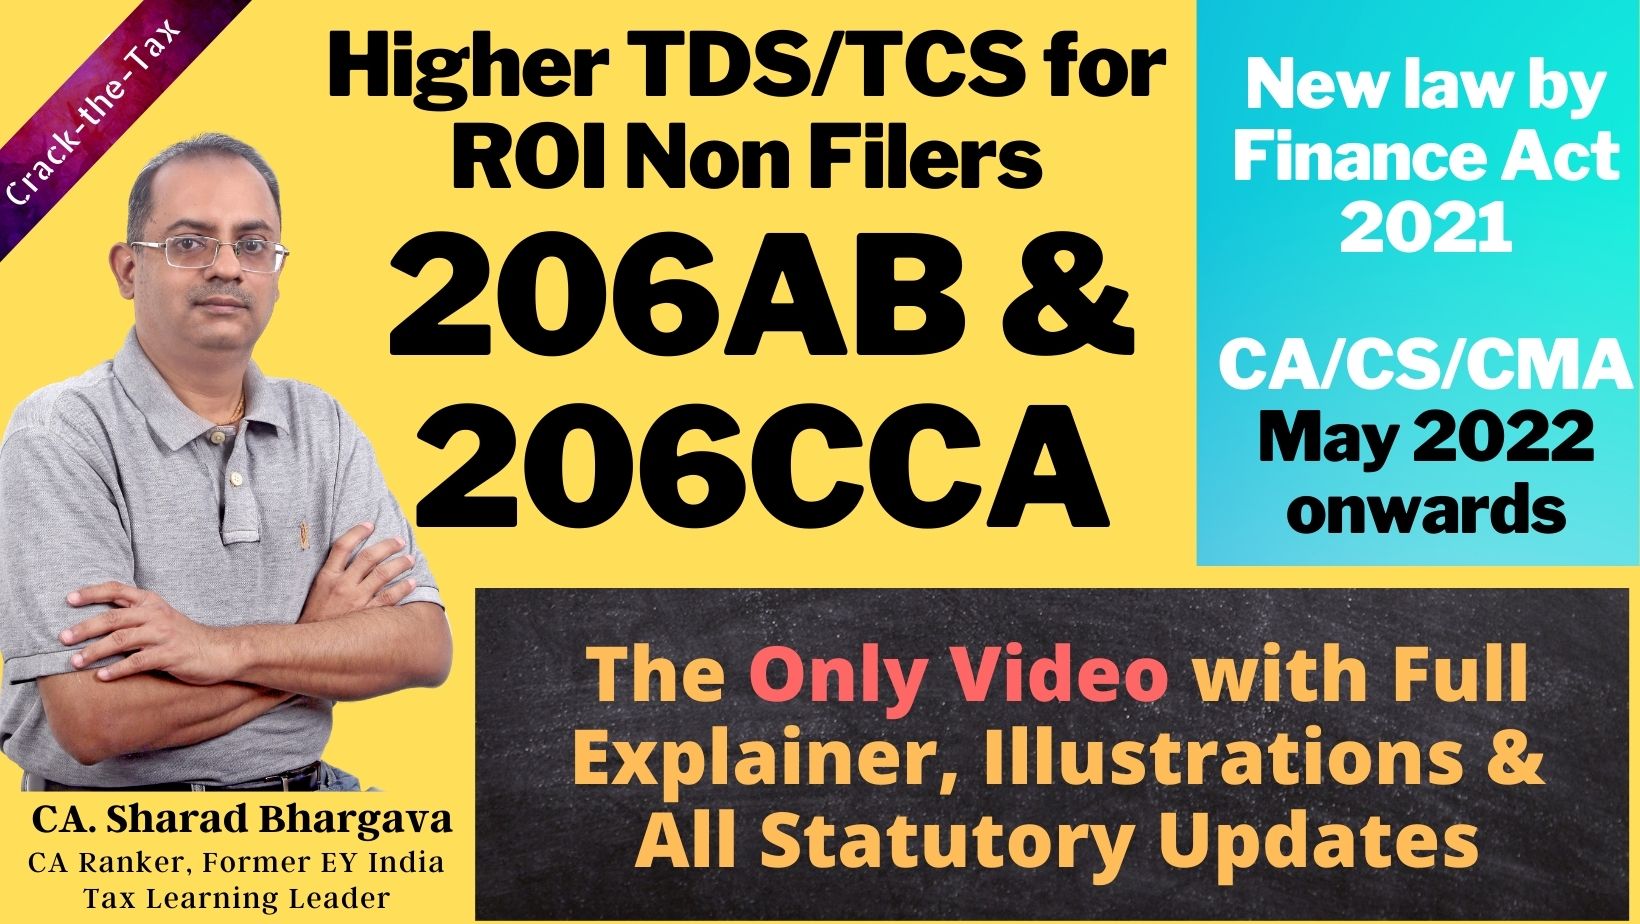 TDS/TCS for ROI non-filers u/s 206AB/206CCA // New law by Finance Act 2021 // By CA. Sharad Bhargava